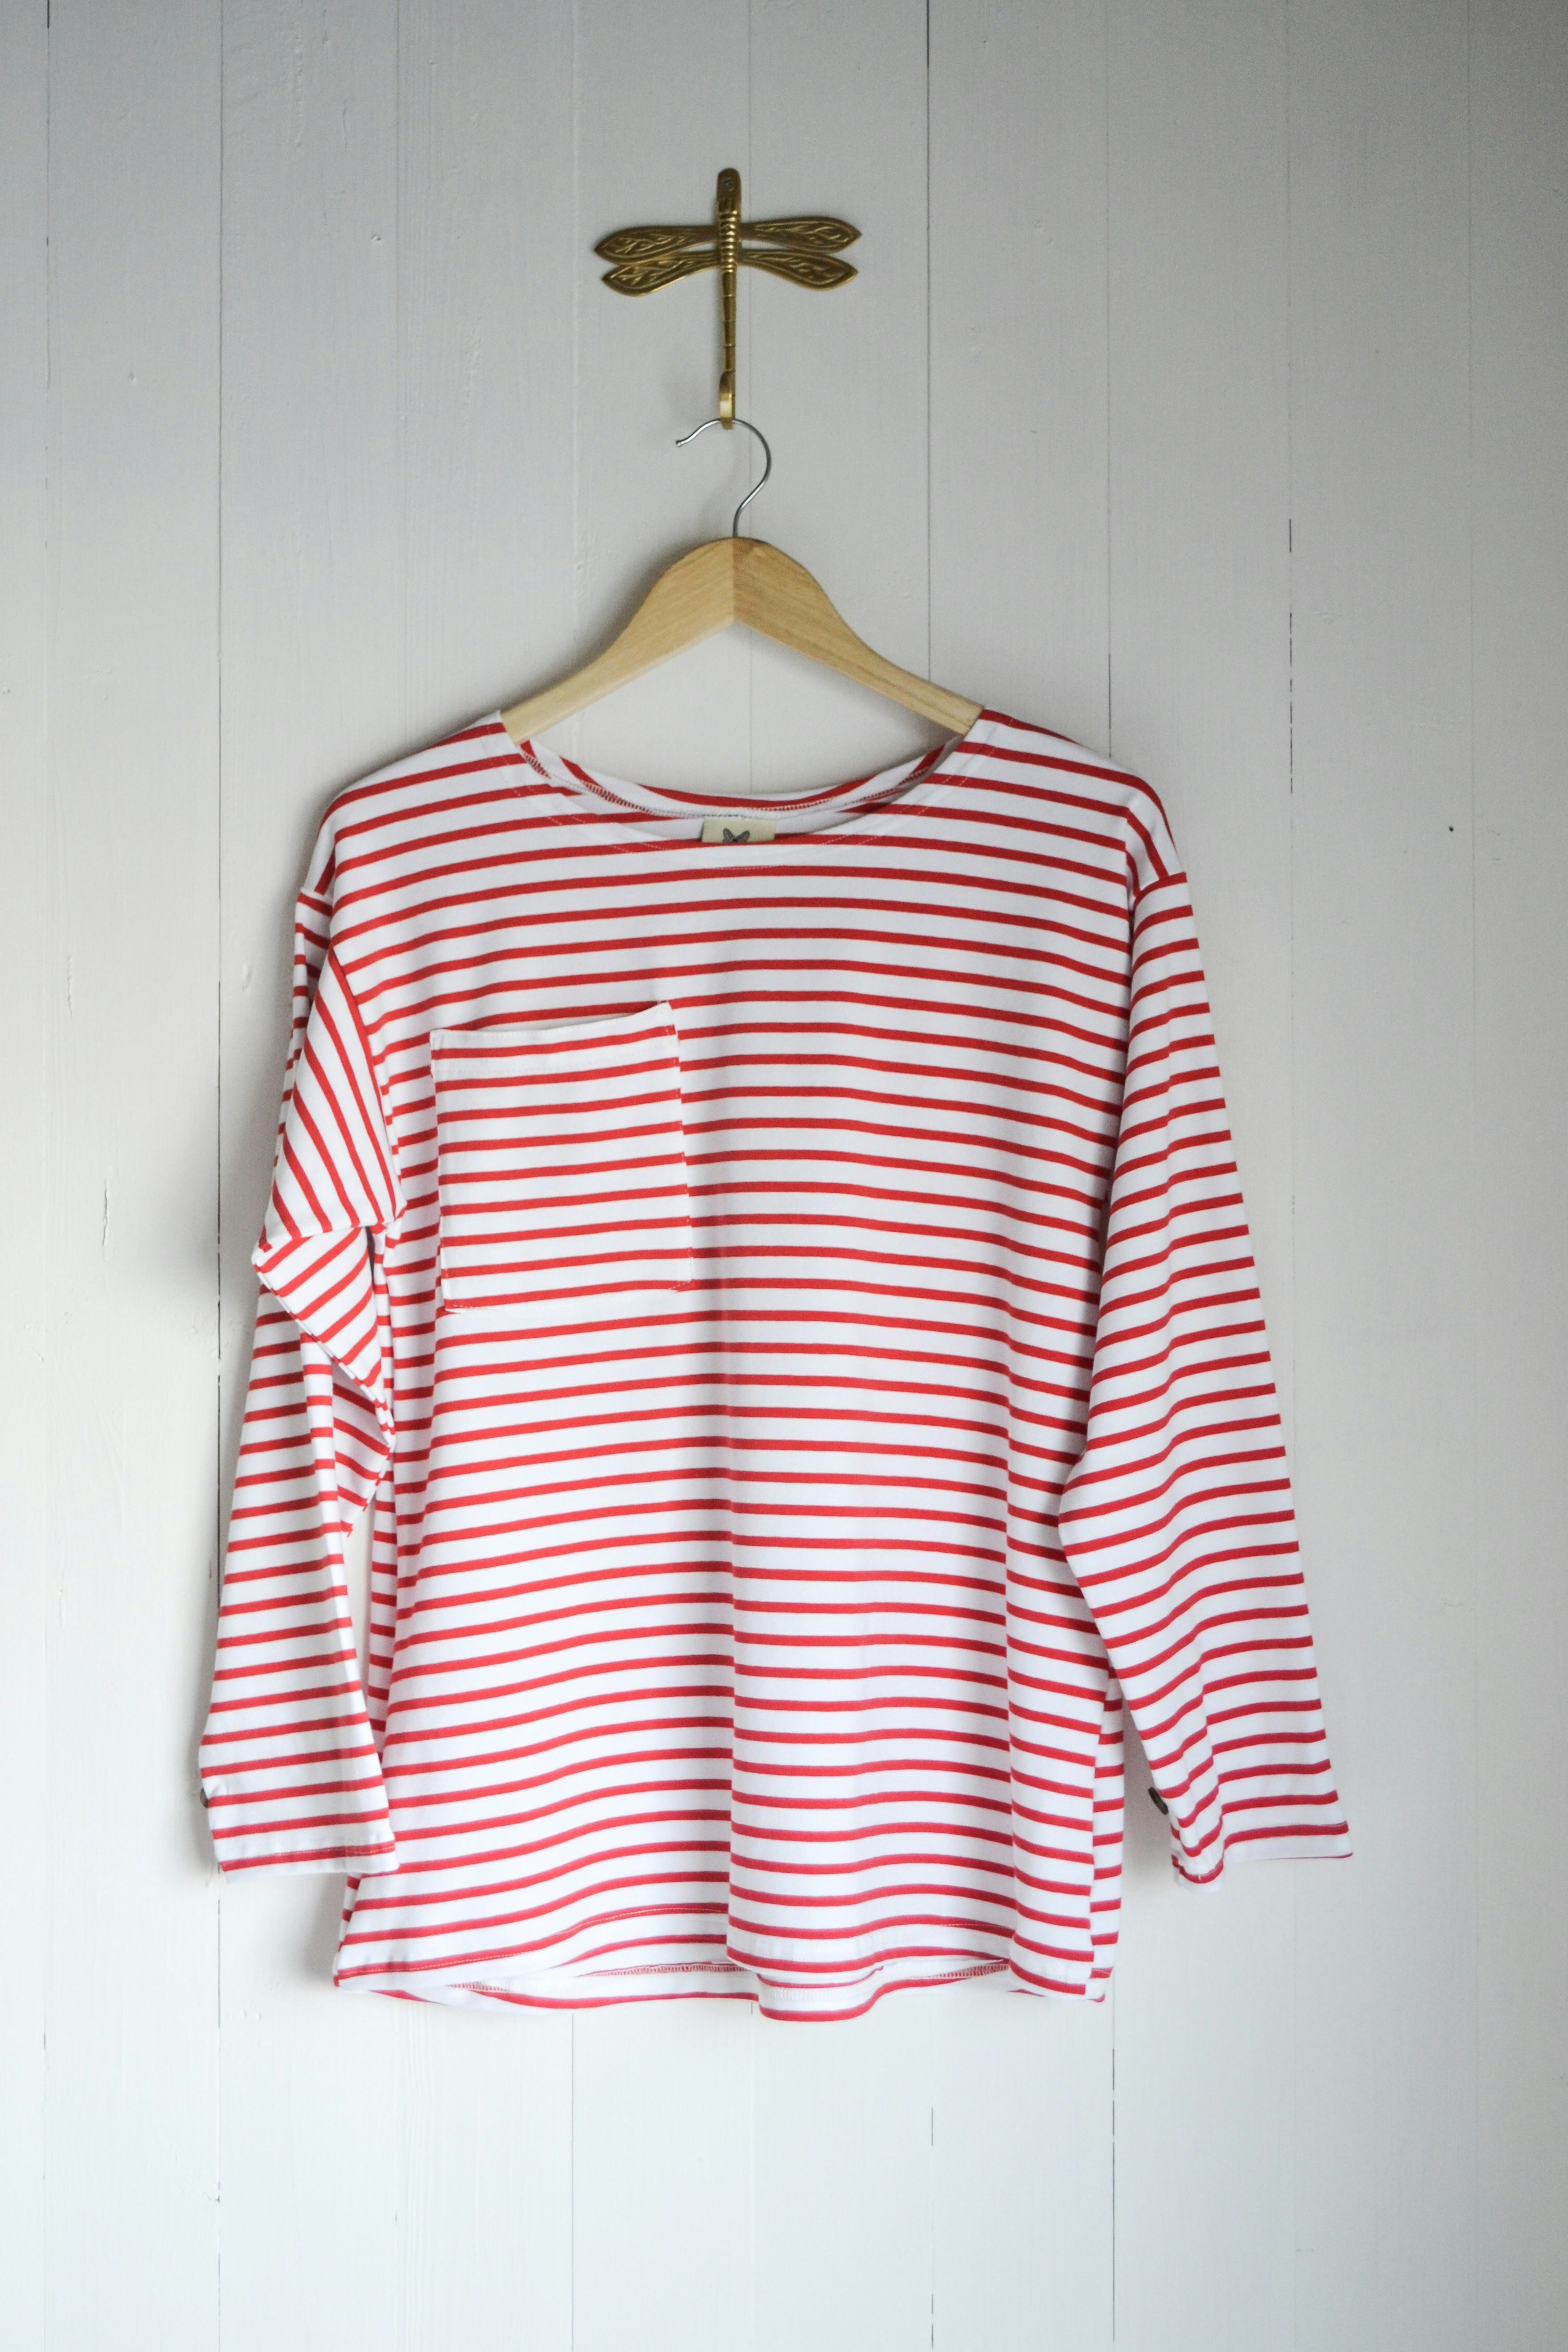 REMOVIBLE LONG SLEEVE TOP - RED AND WHITE STRIPES